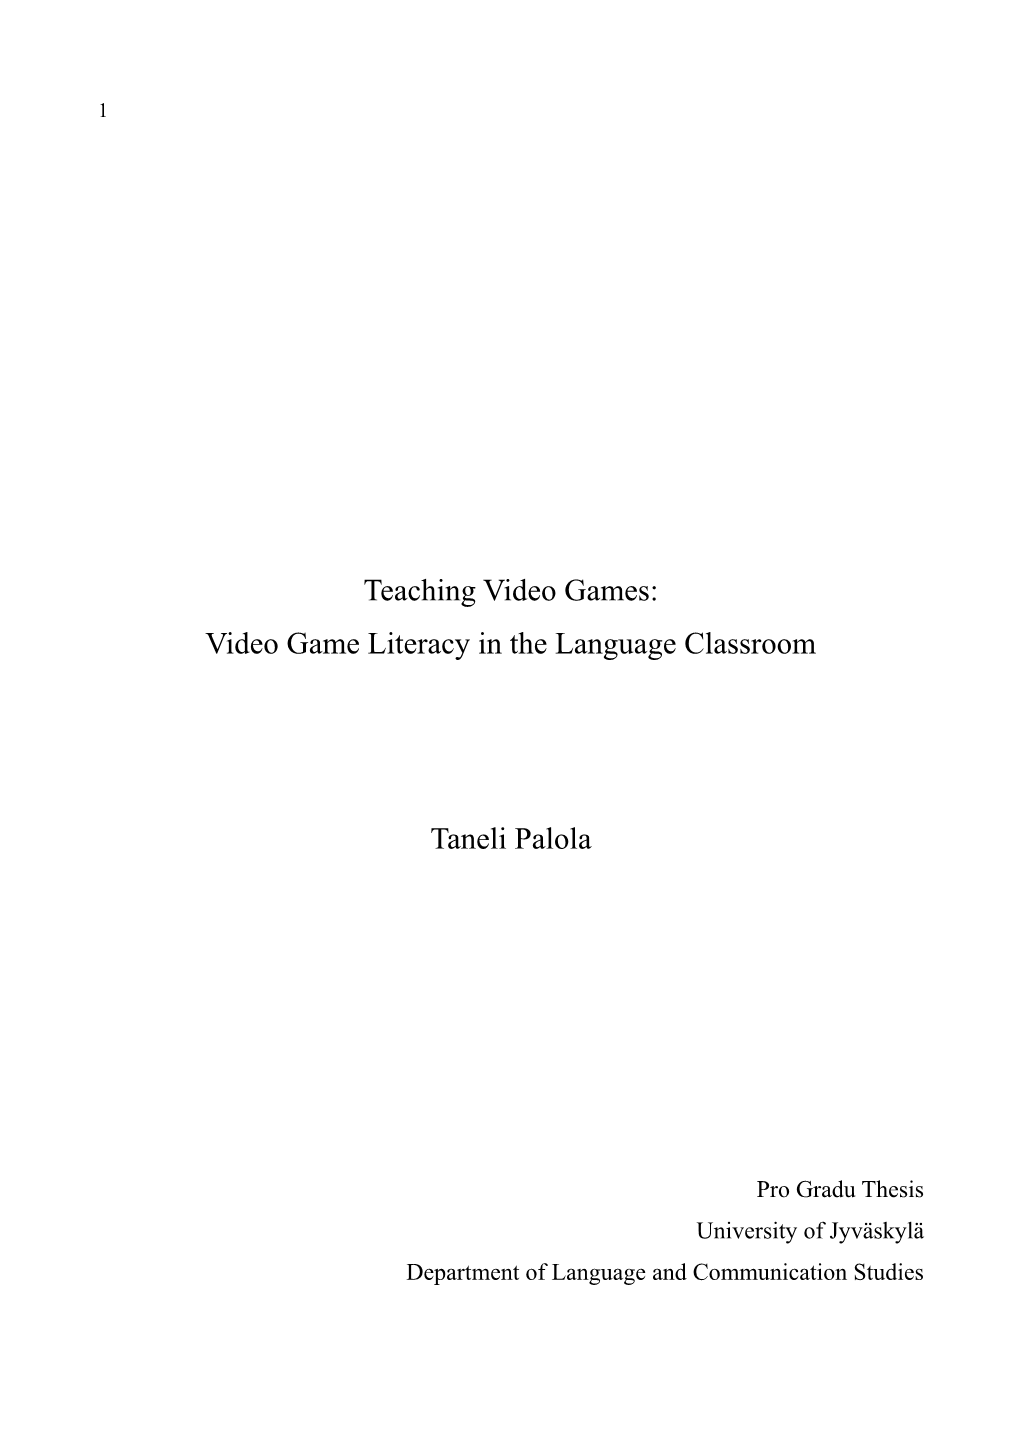 Teaching Video Games: Video Game Literacy in the Language Classroom